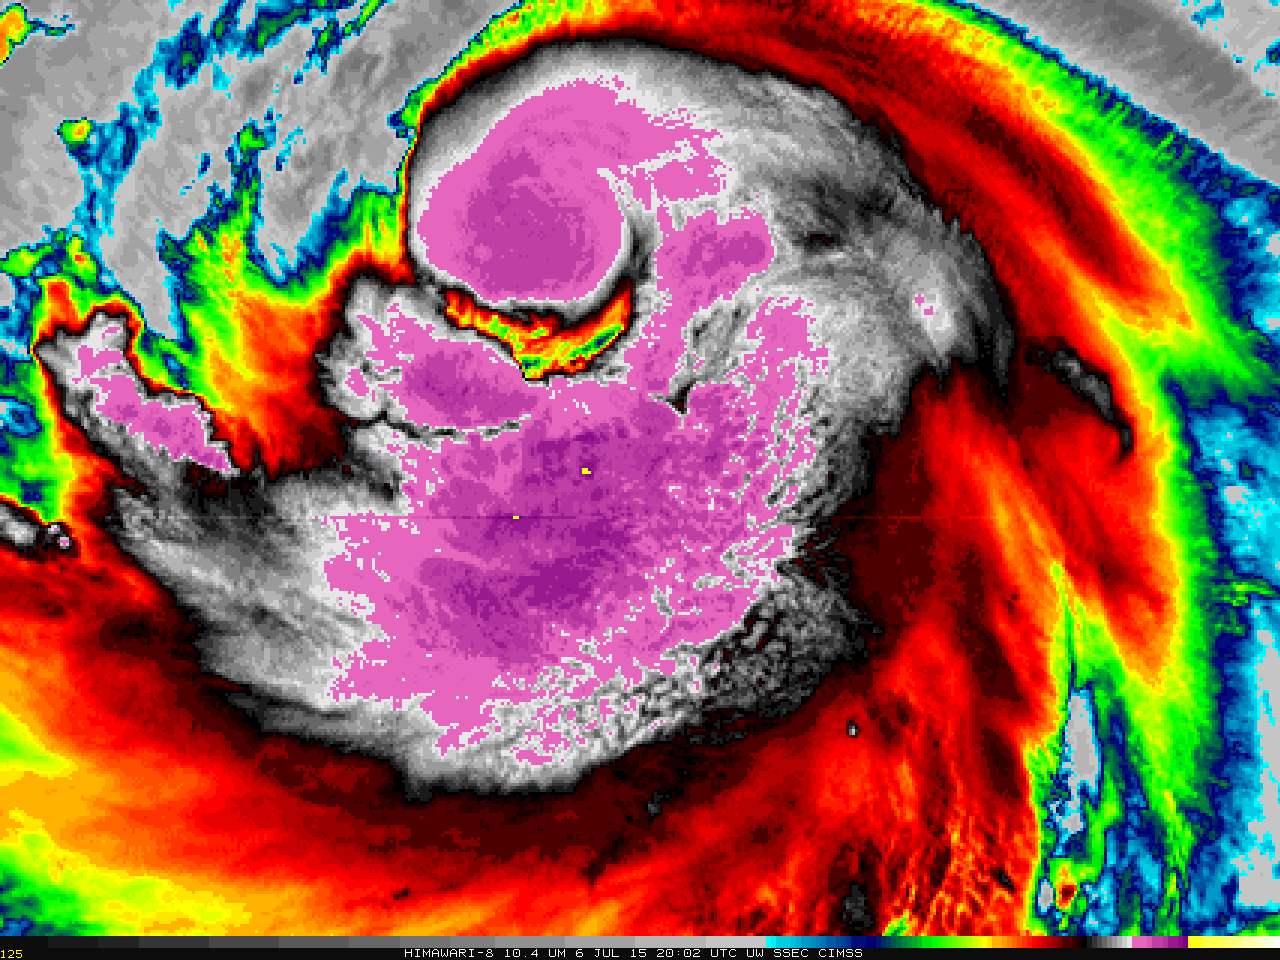 Himawari-8 10.35 µm infrared imagery, 1447-2002 UTC on 6 July 2015 (Click to animate)